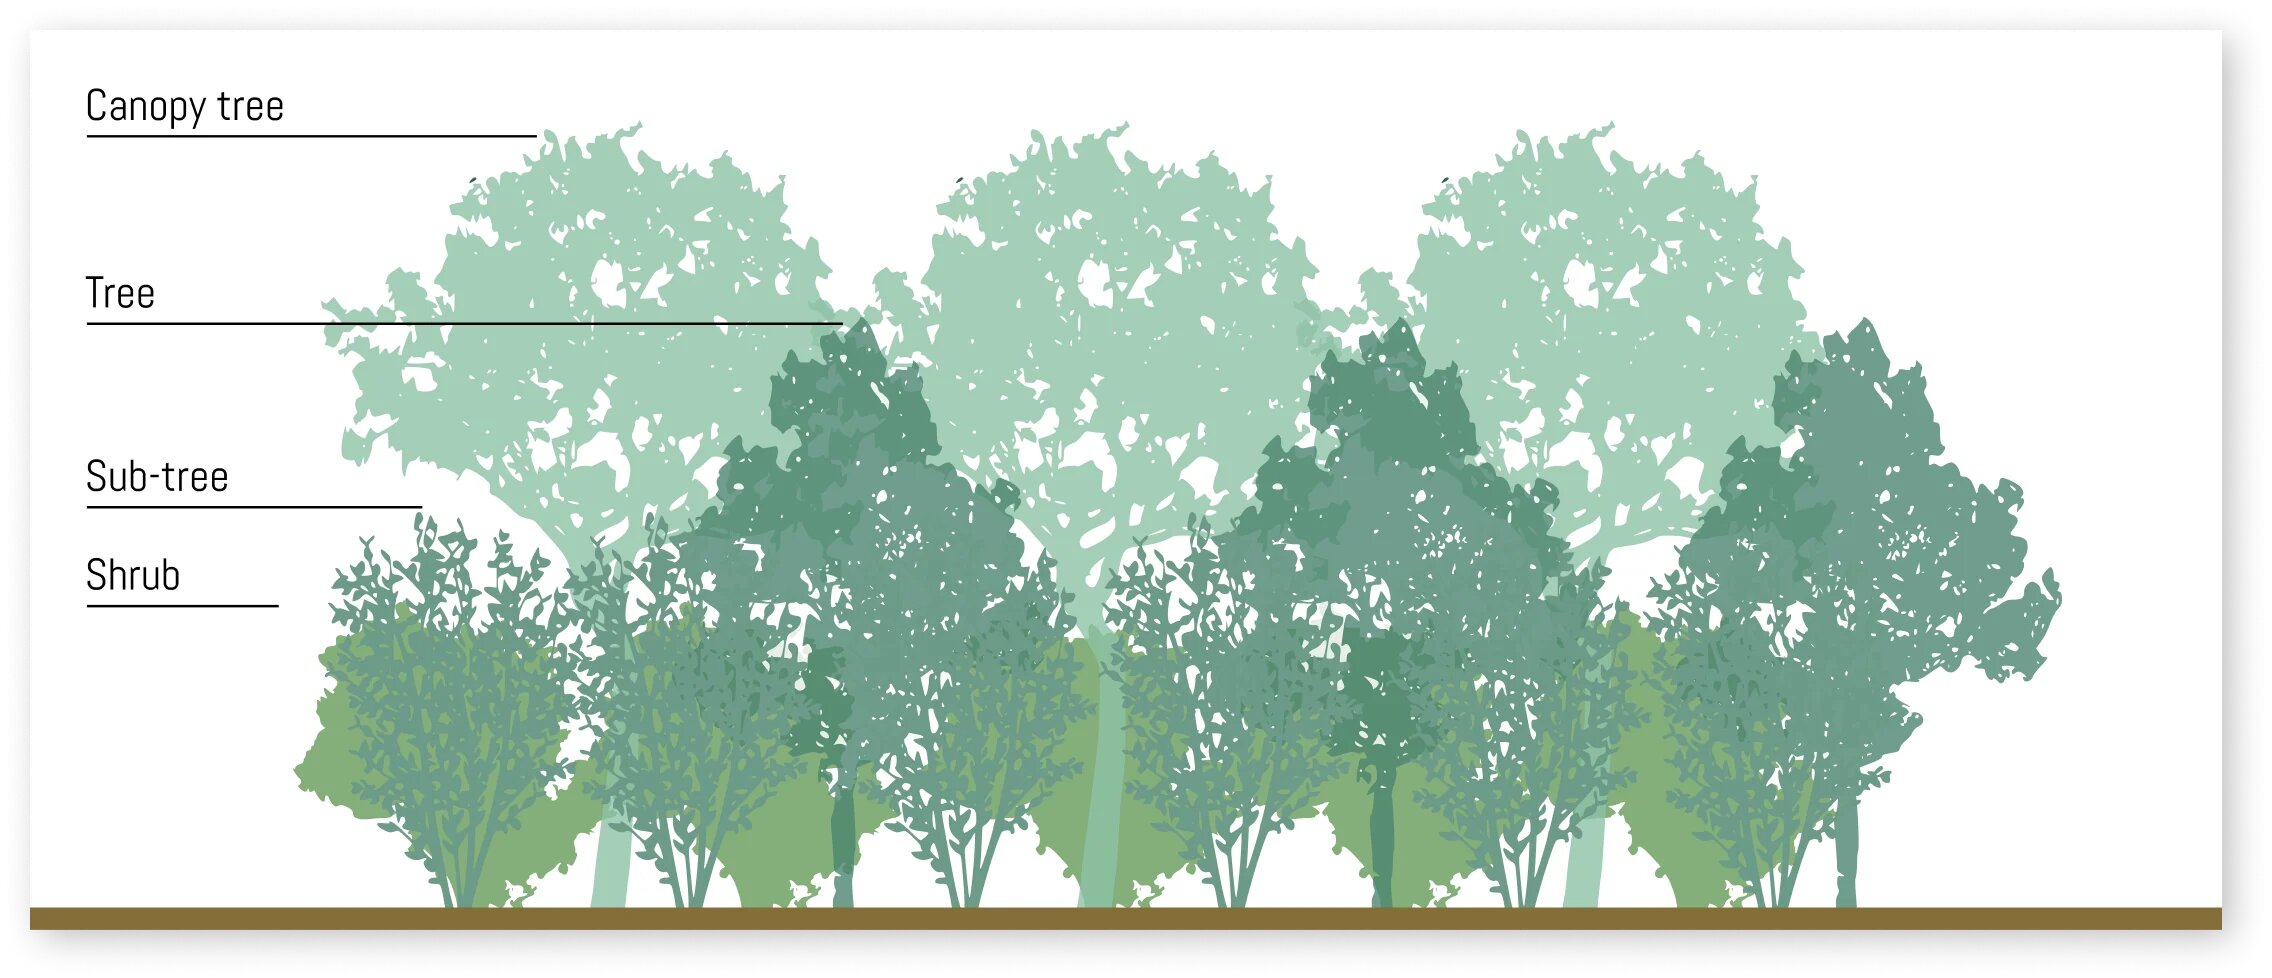 Diagram of Miyawaki forest layers with labels indicating canopy trees, trees, sub-trees, and shrubs.